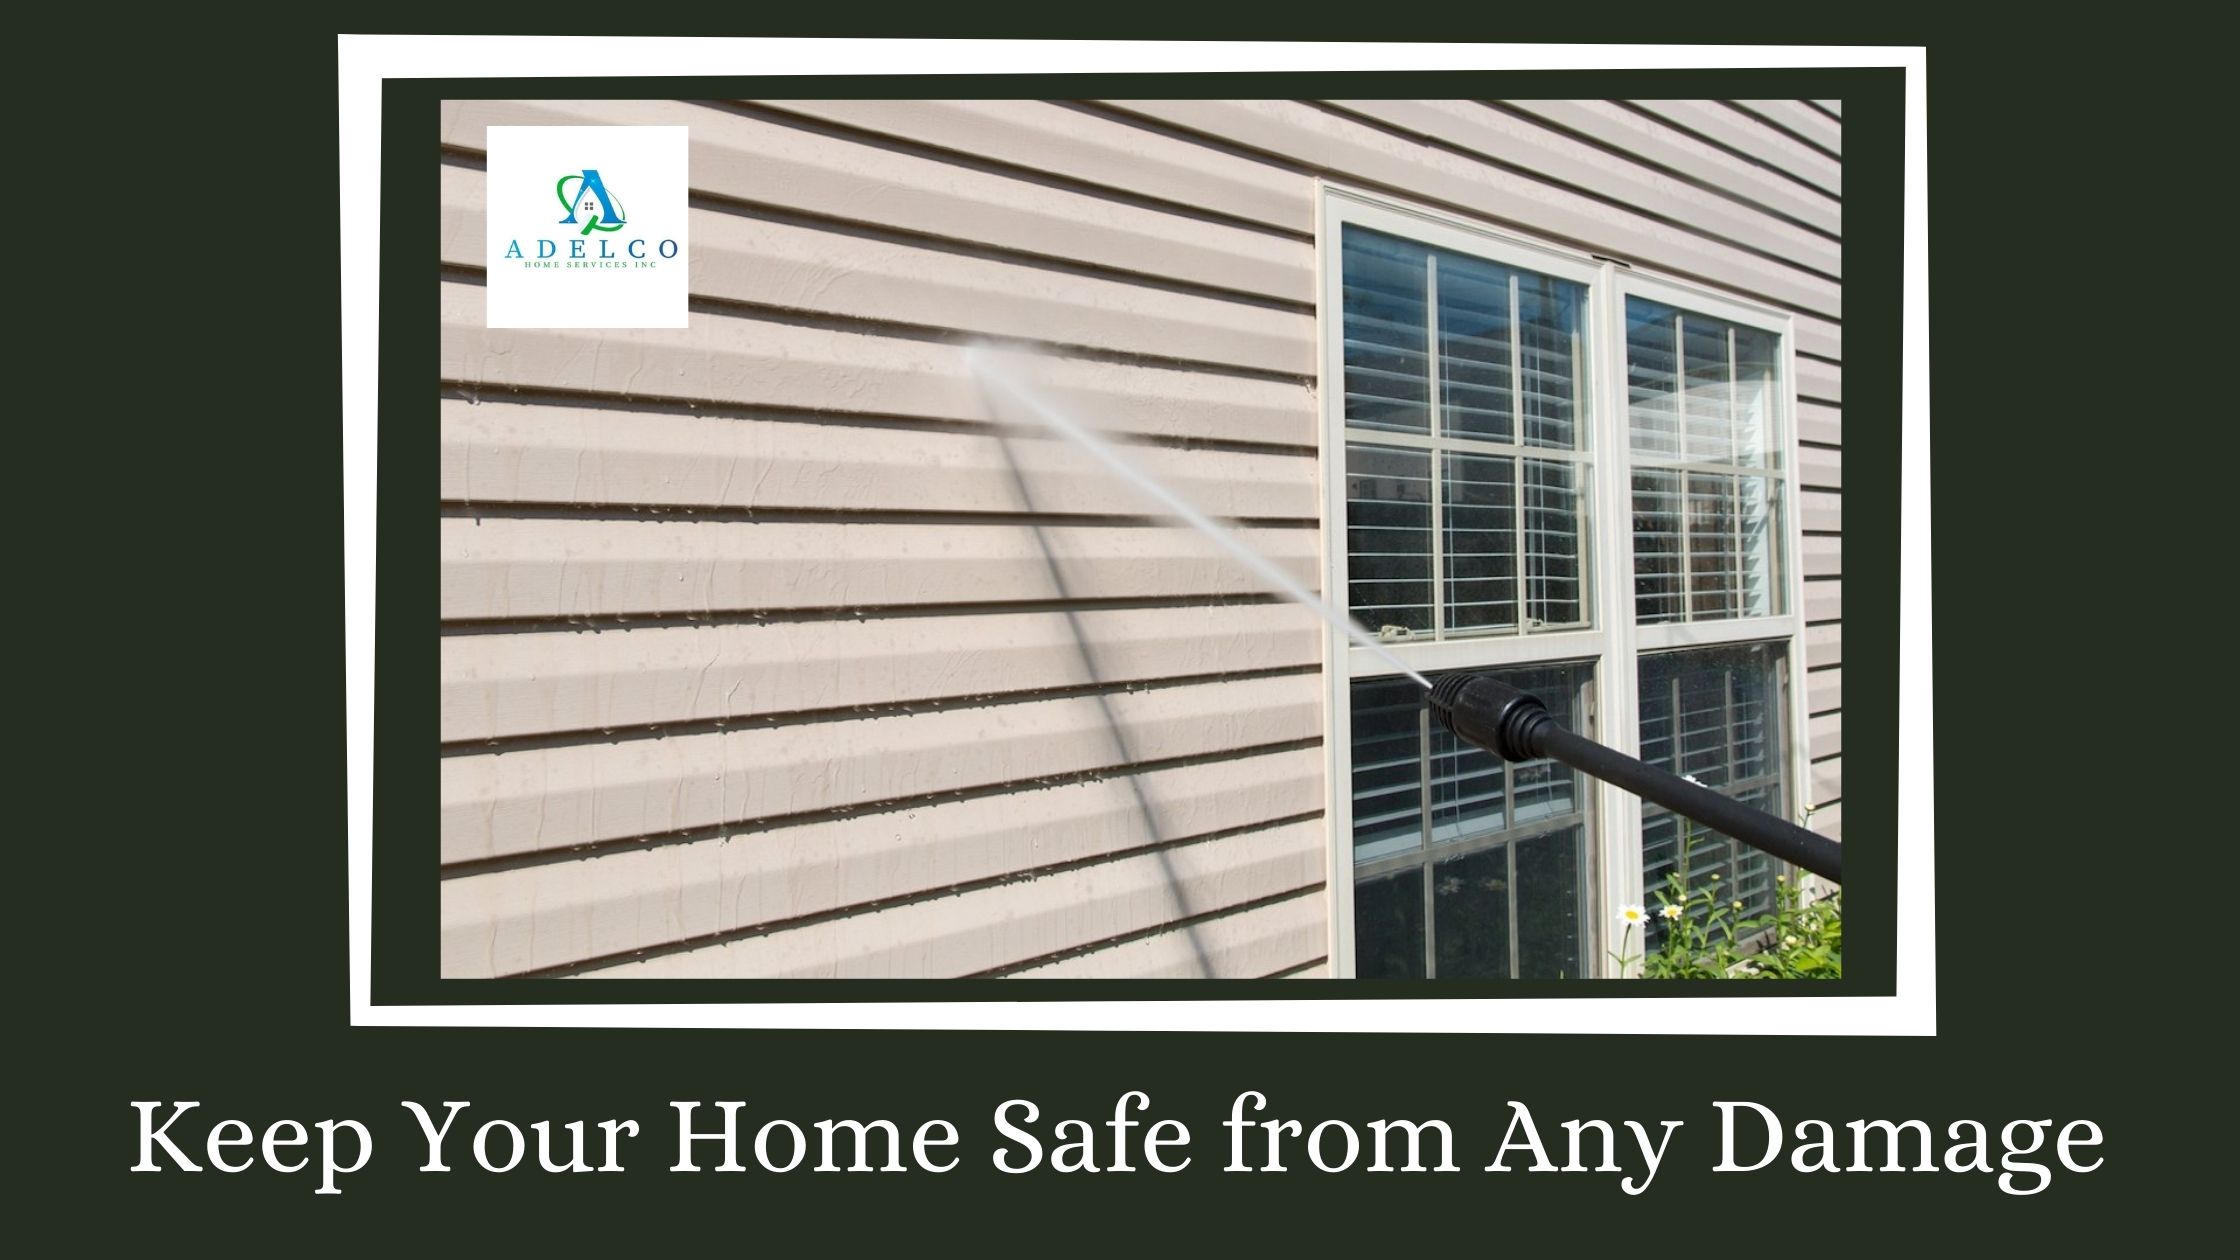 Keep Your Home Safe from Any Damage